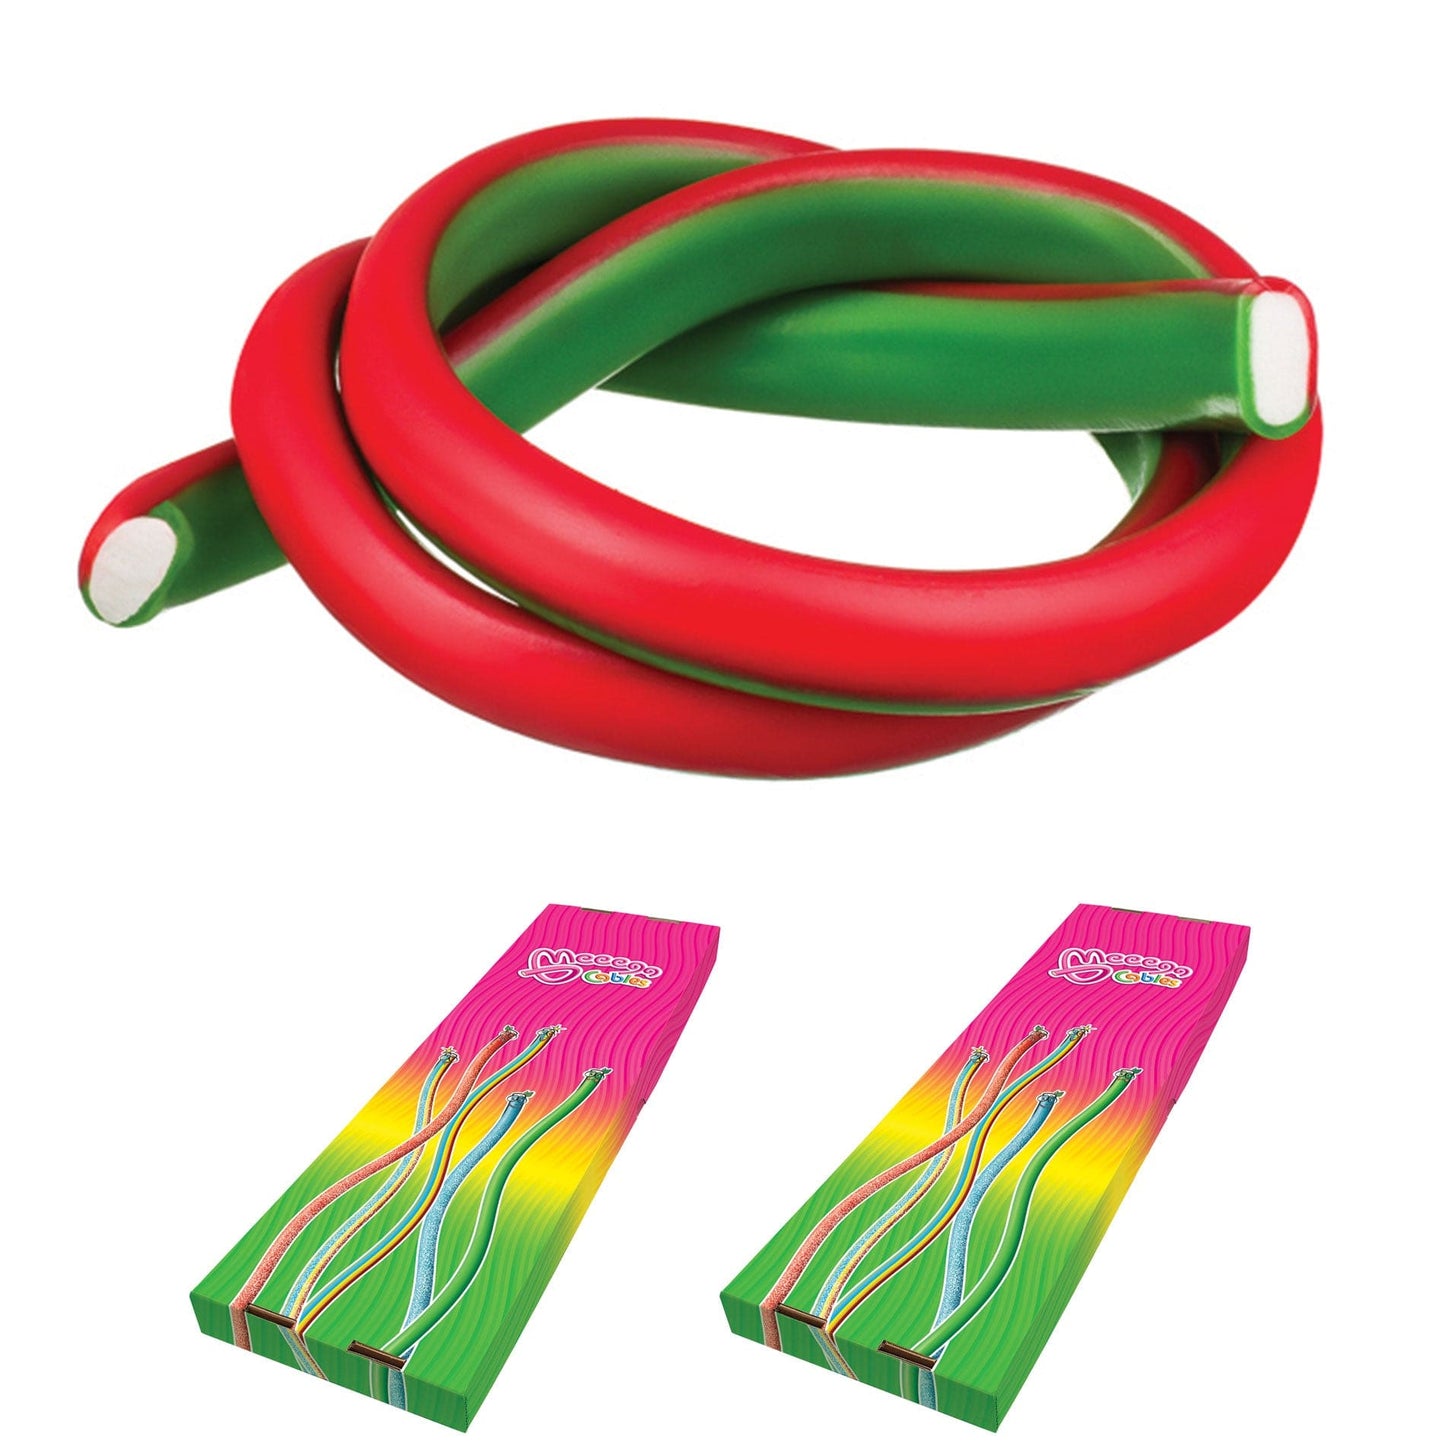 Novelty Concessions Gummy Rope WATERMELON STRAWBERRY / 2 Pack (60 pieces) Meeega Cables European Chewy Rope Candy - Box of 30 individually wrapped Meeega Cables, each over 2-feet long cups with lids and straws